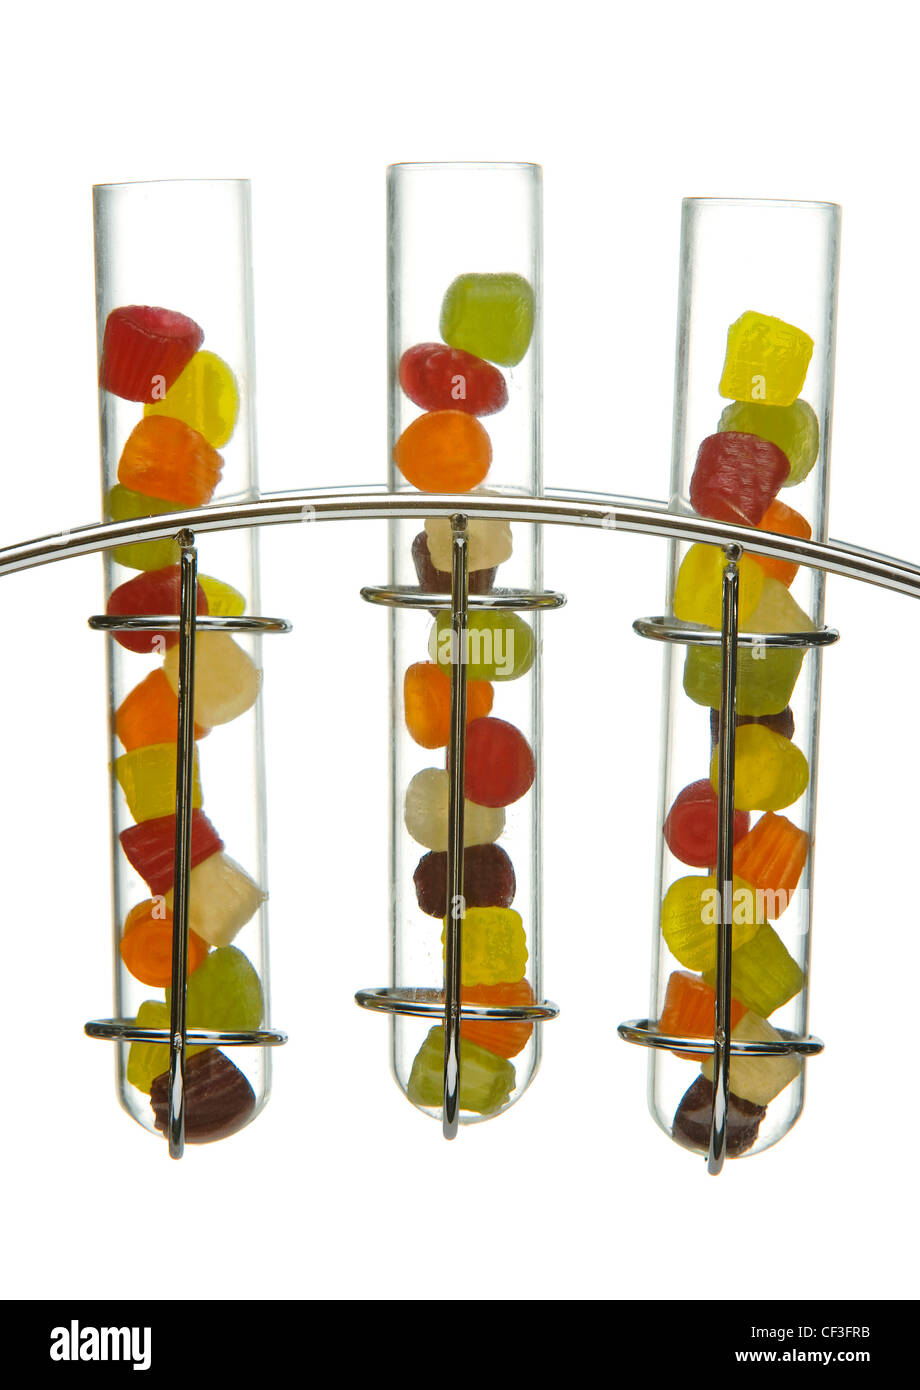 Miniature wine gums in glass test tubes in a chrome stand Stock Photo